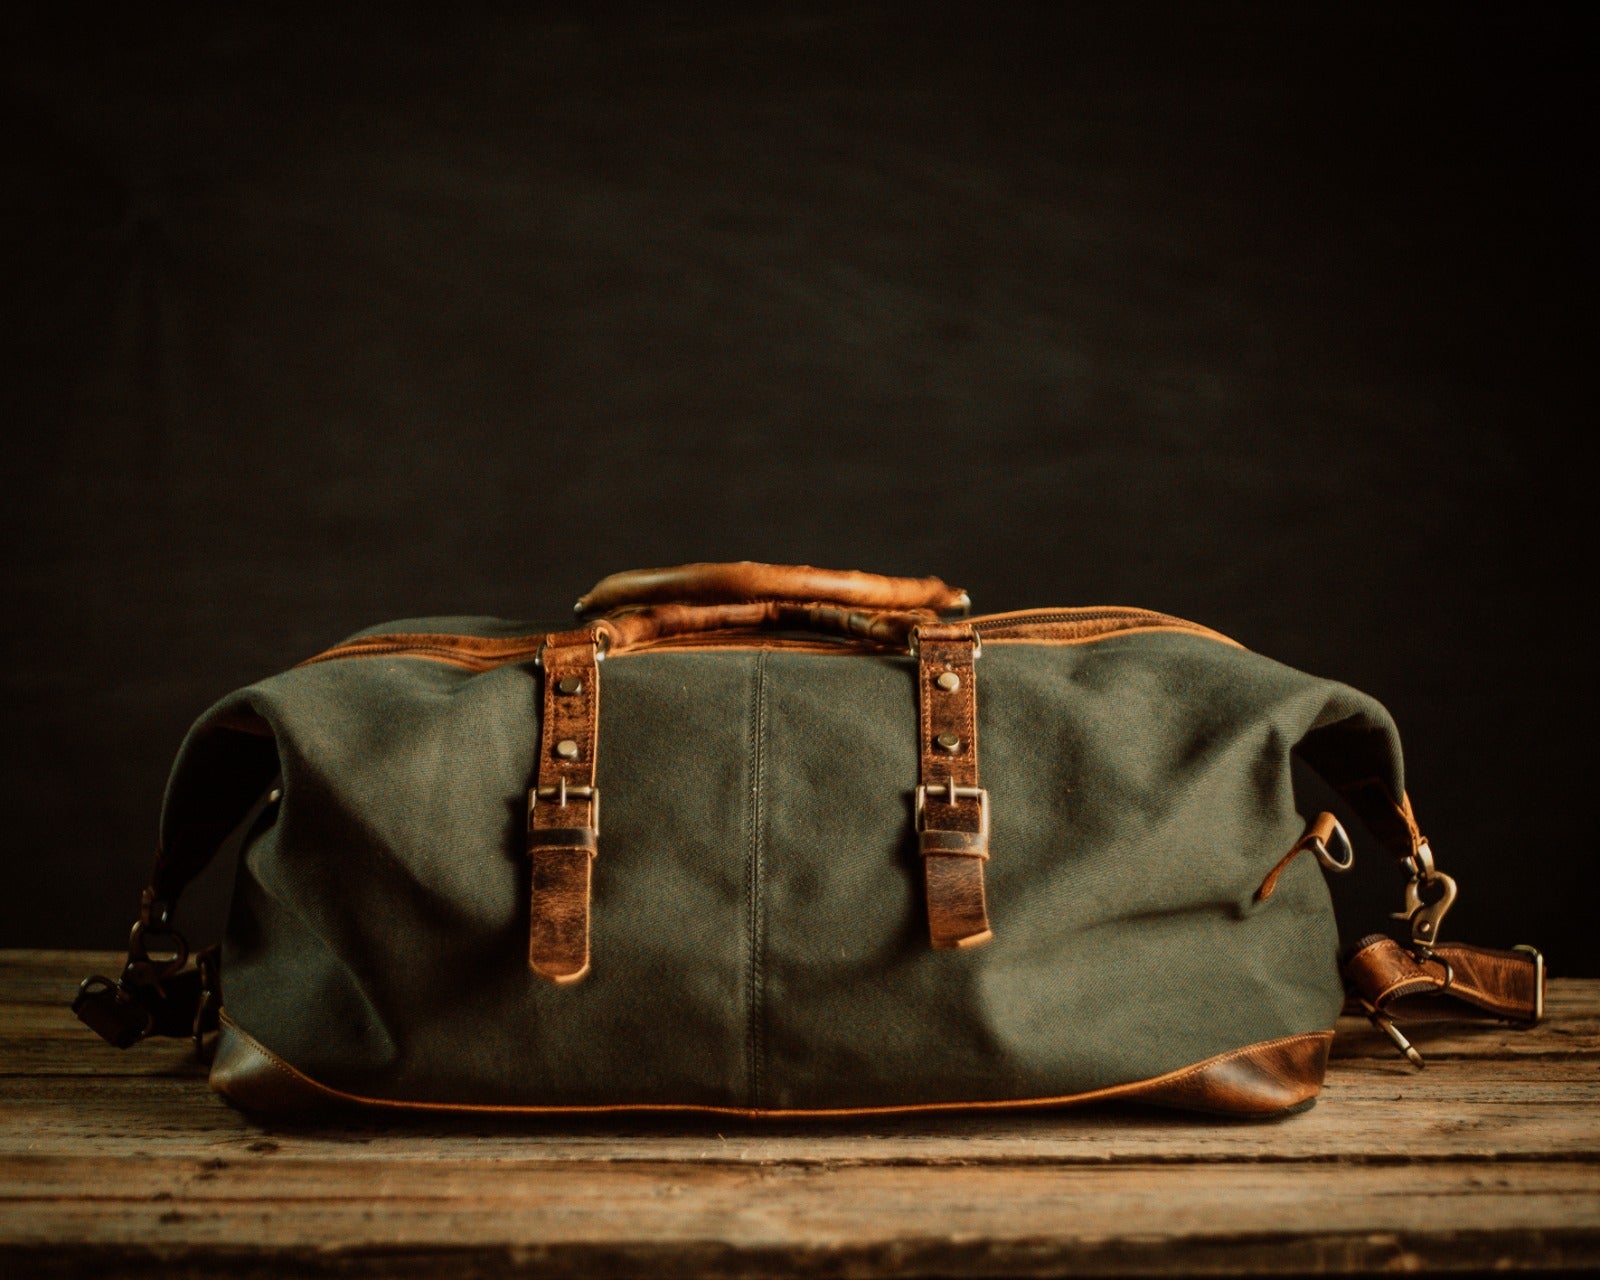 Club Duffel Bag with Leather Pockets and Ends - Steurer & Jacoby